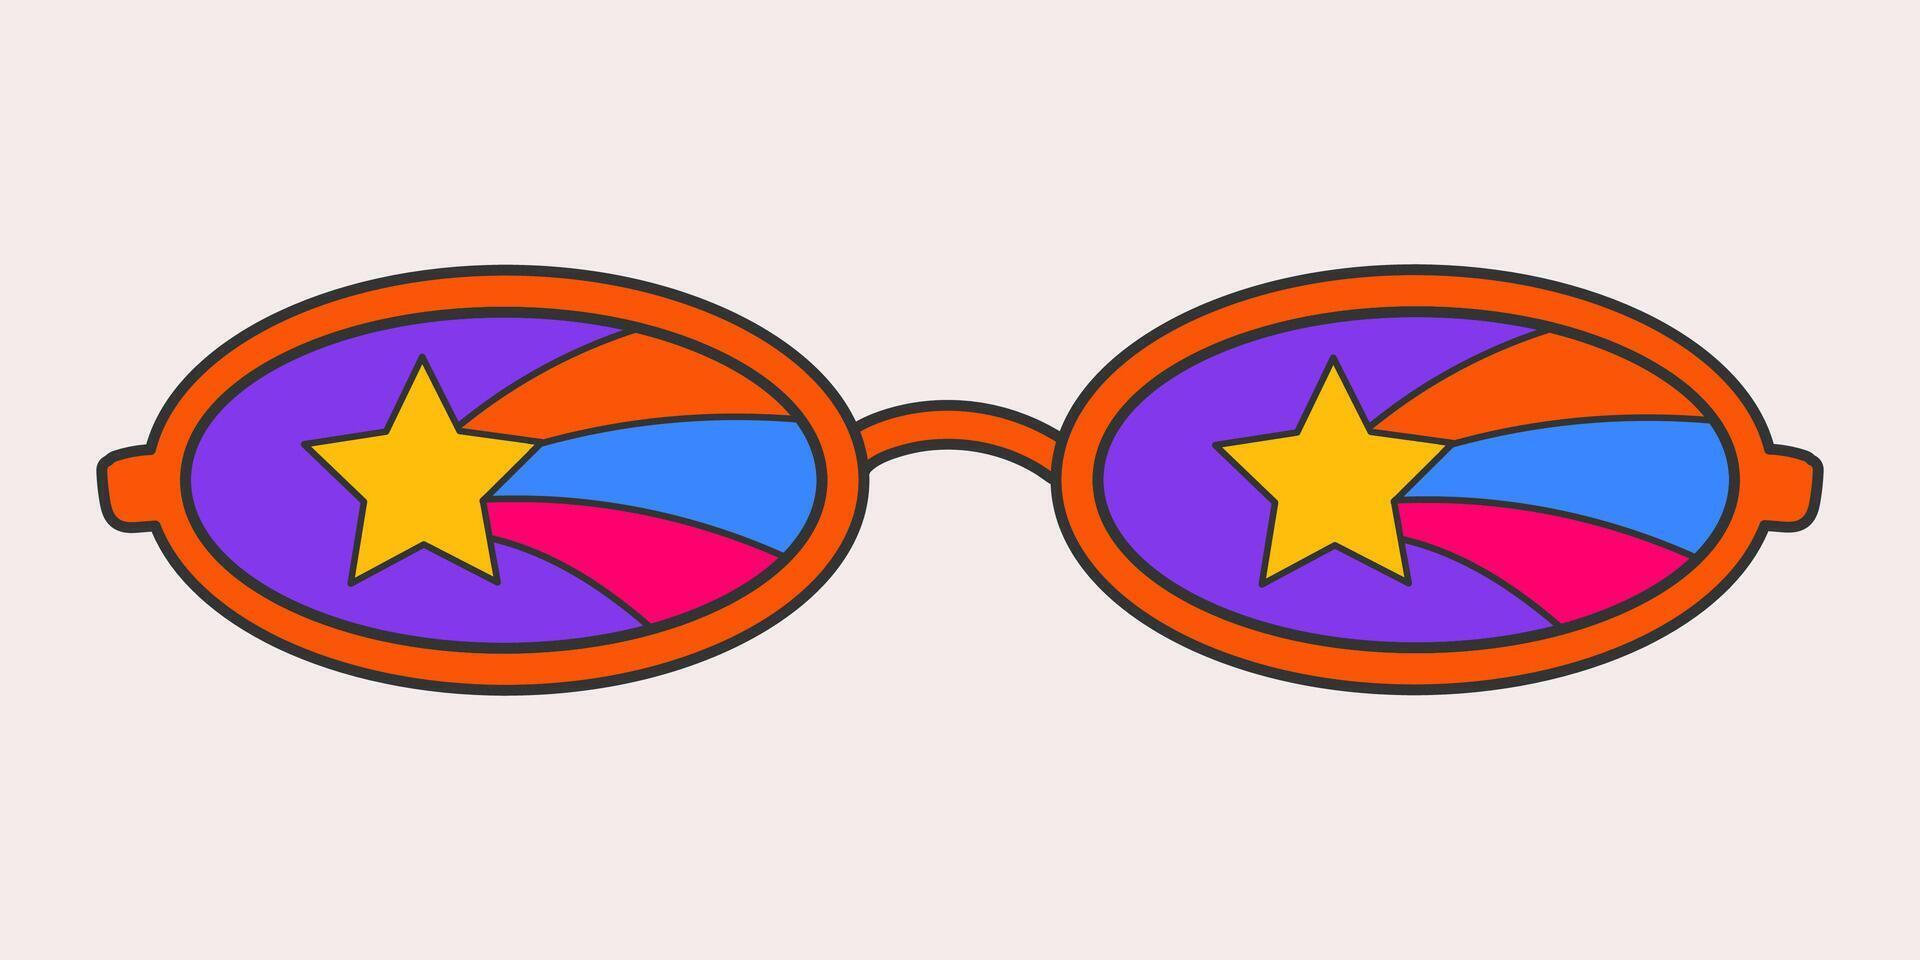 Bright oval sunglasses in a groovy style isolated on a light background. Vintage retro colors, star and rainbow print on glass. Psychedelic vector doodle sticker, 70s, nostalgia, hippie.